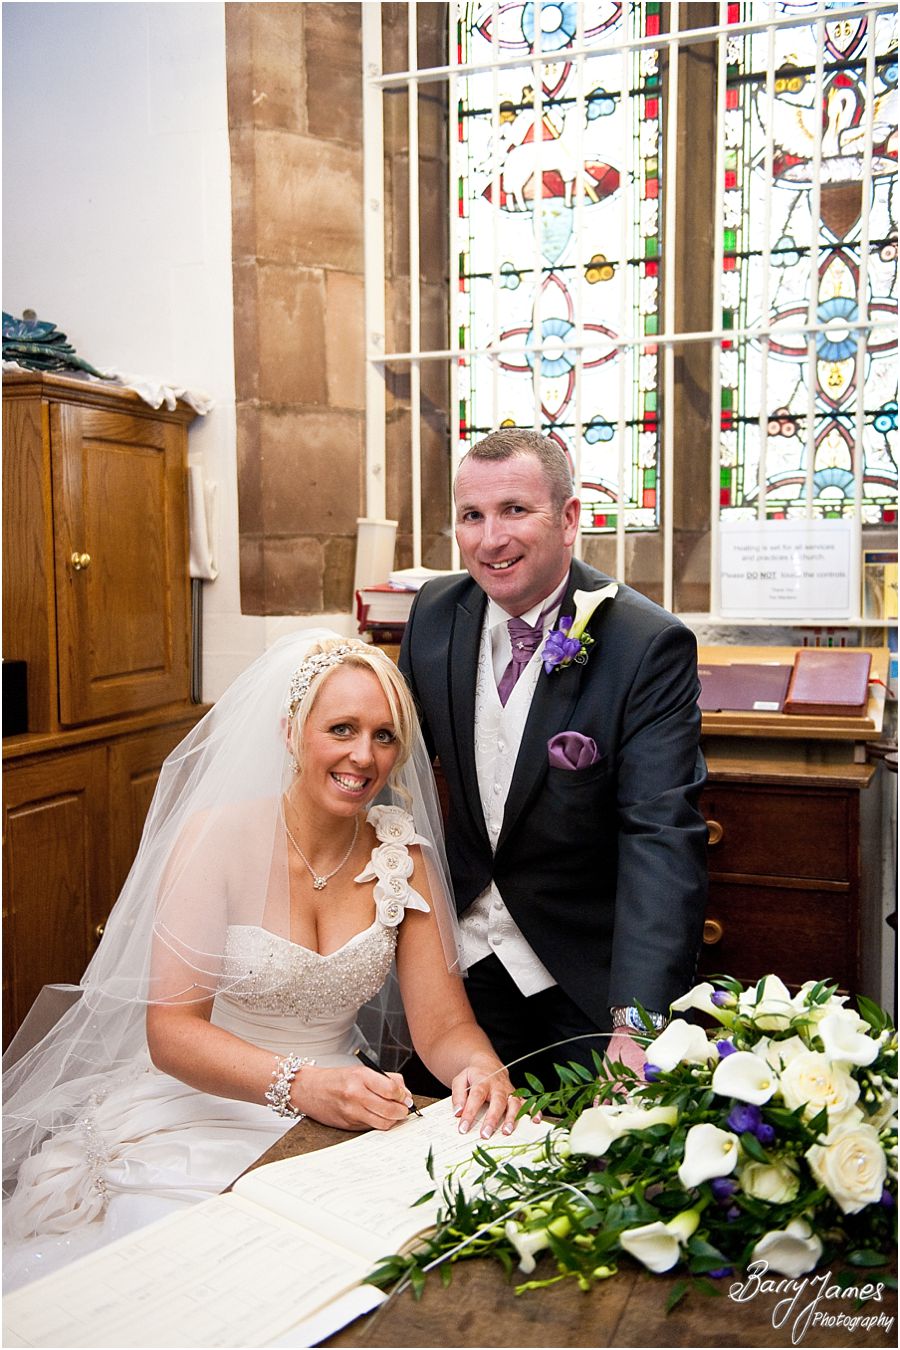 Capturing the beautiful church wedding ceremony at St Luke Church in Cannock by Contemporary and Candid Wedding Photographer Barry James